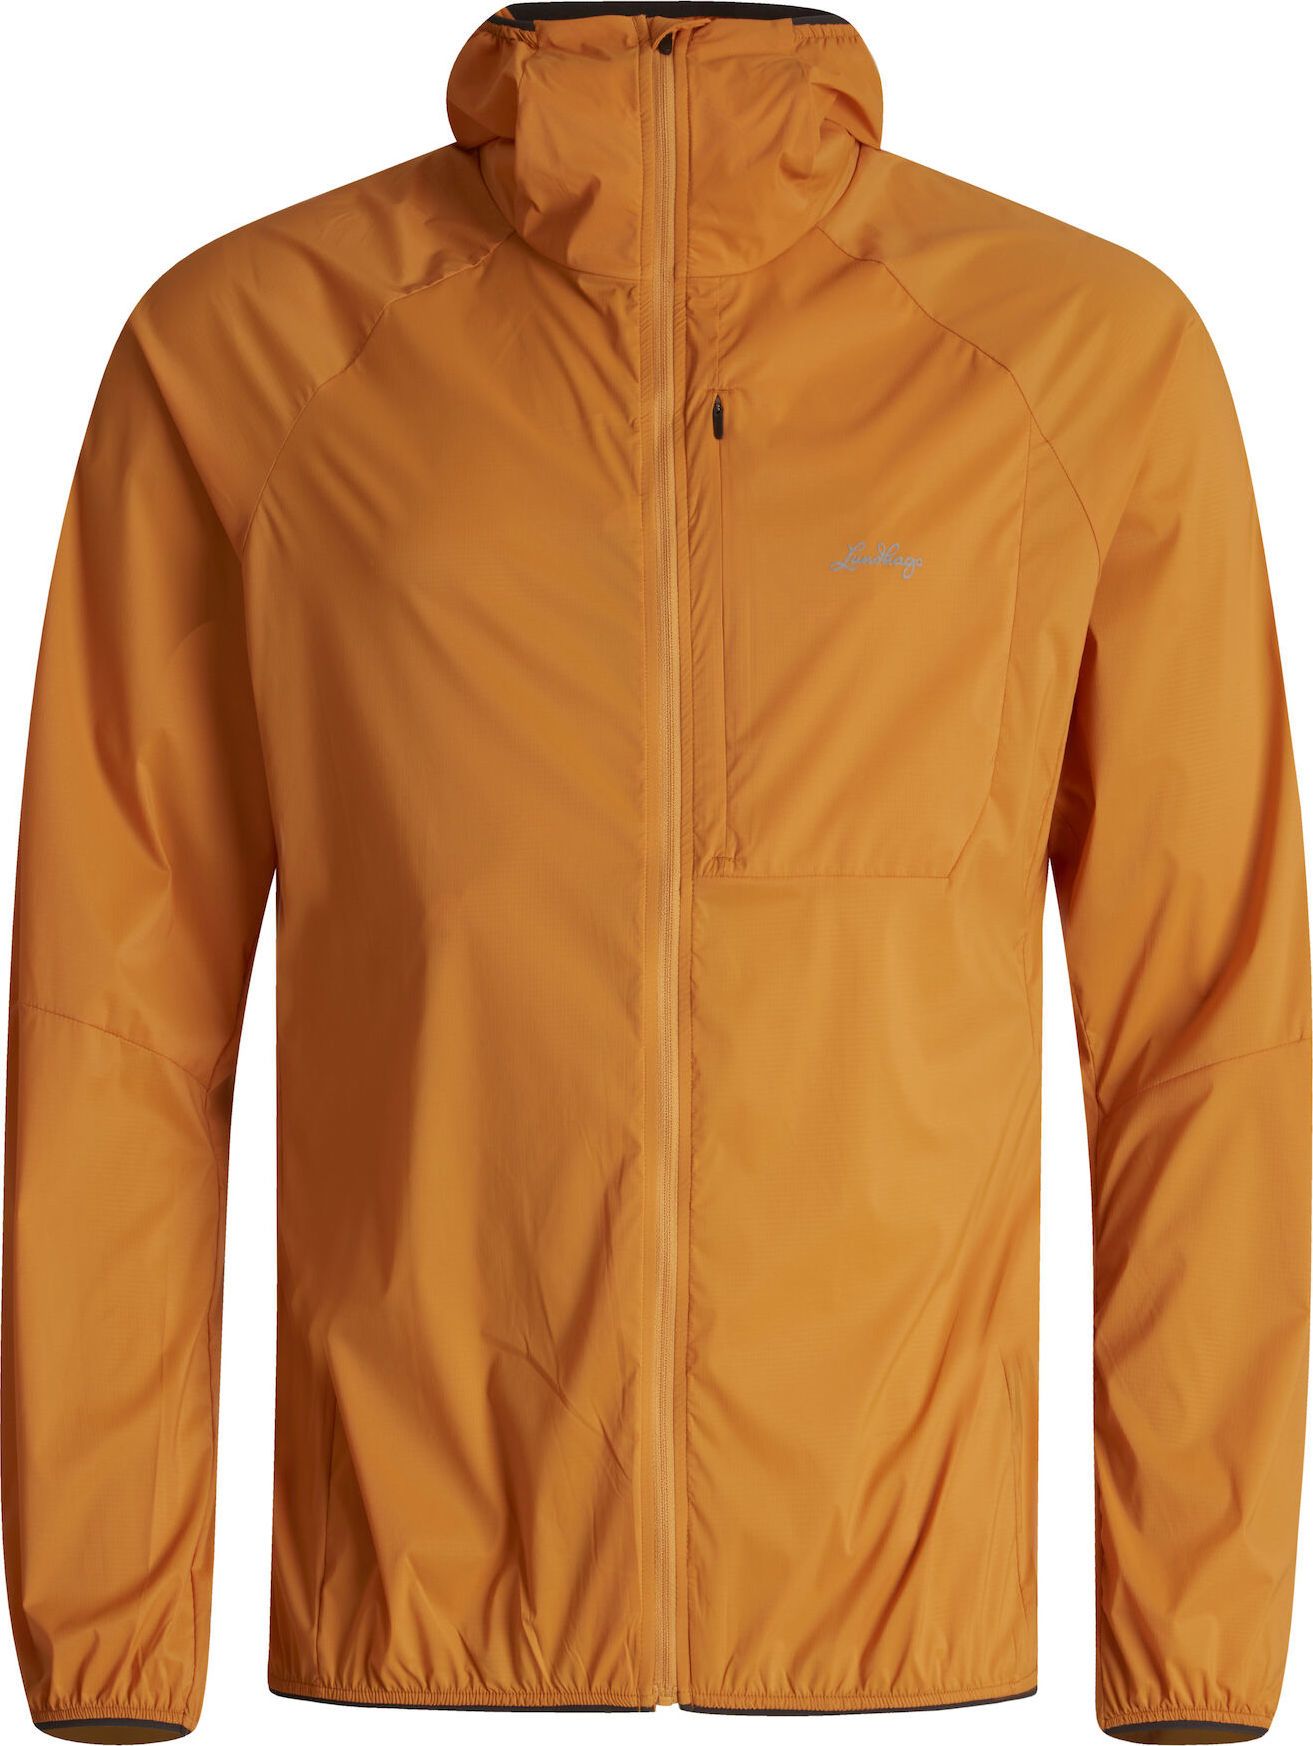 Lundhags Men's Tived Light Wind Jacket Gold